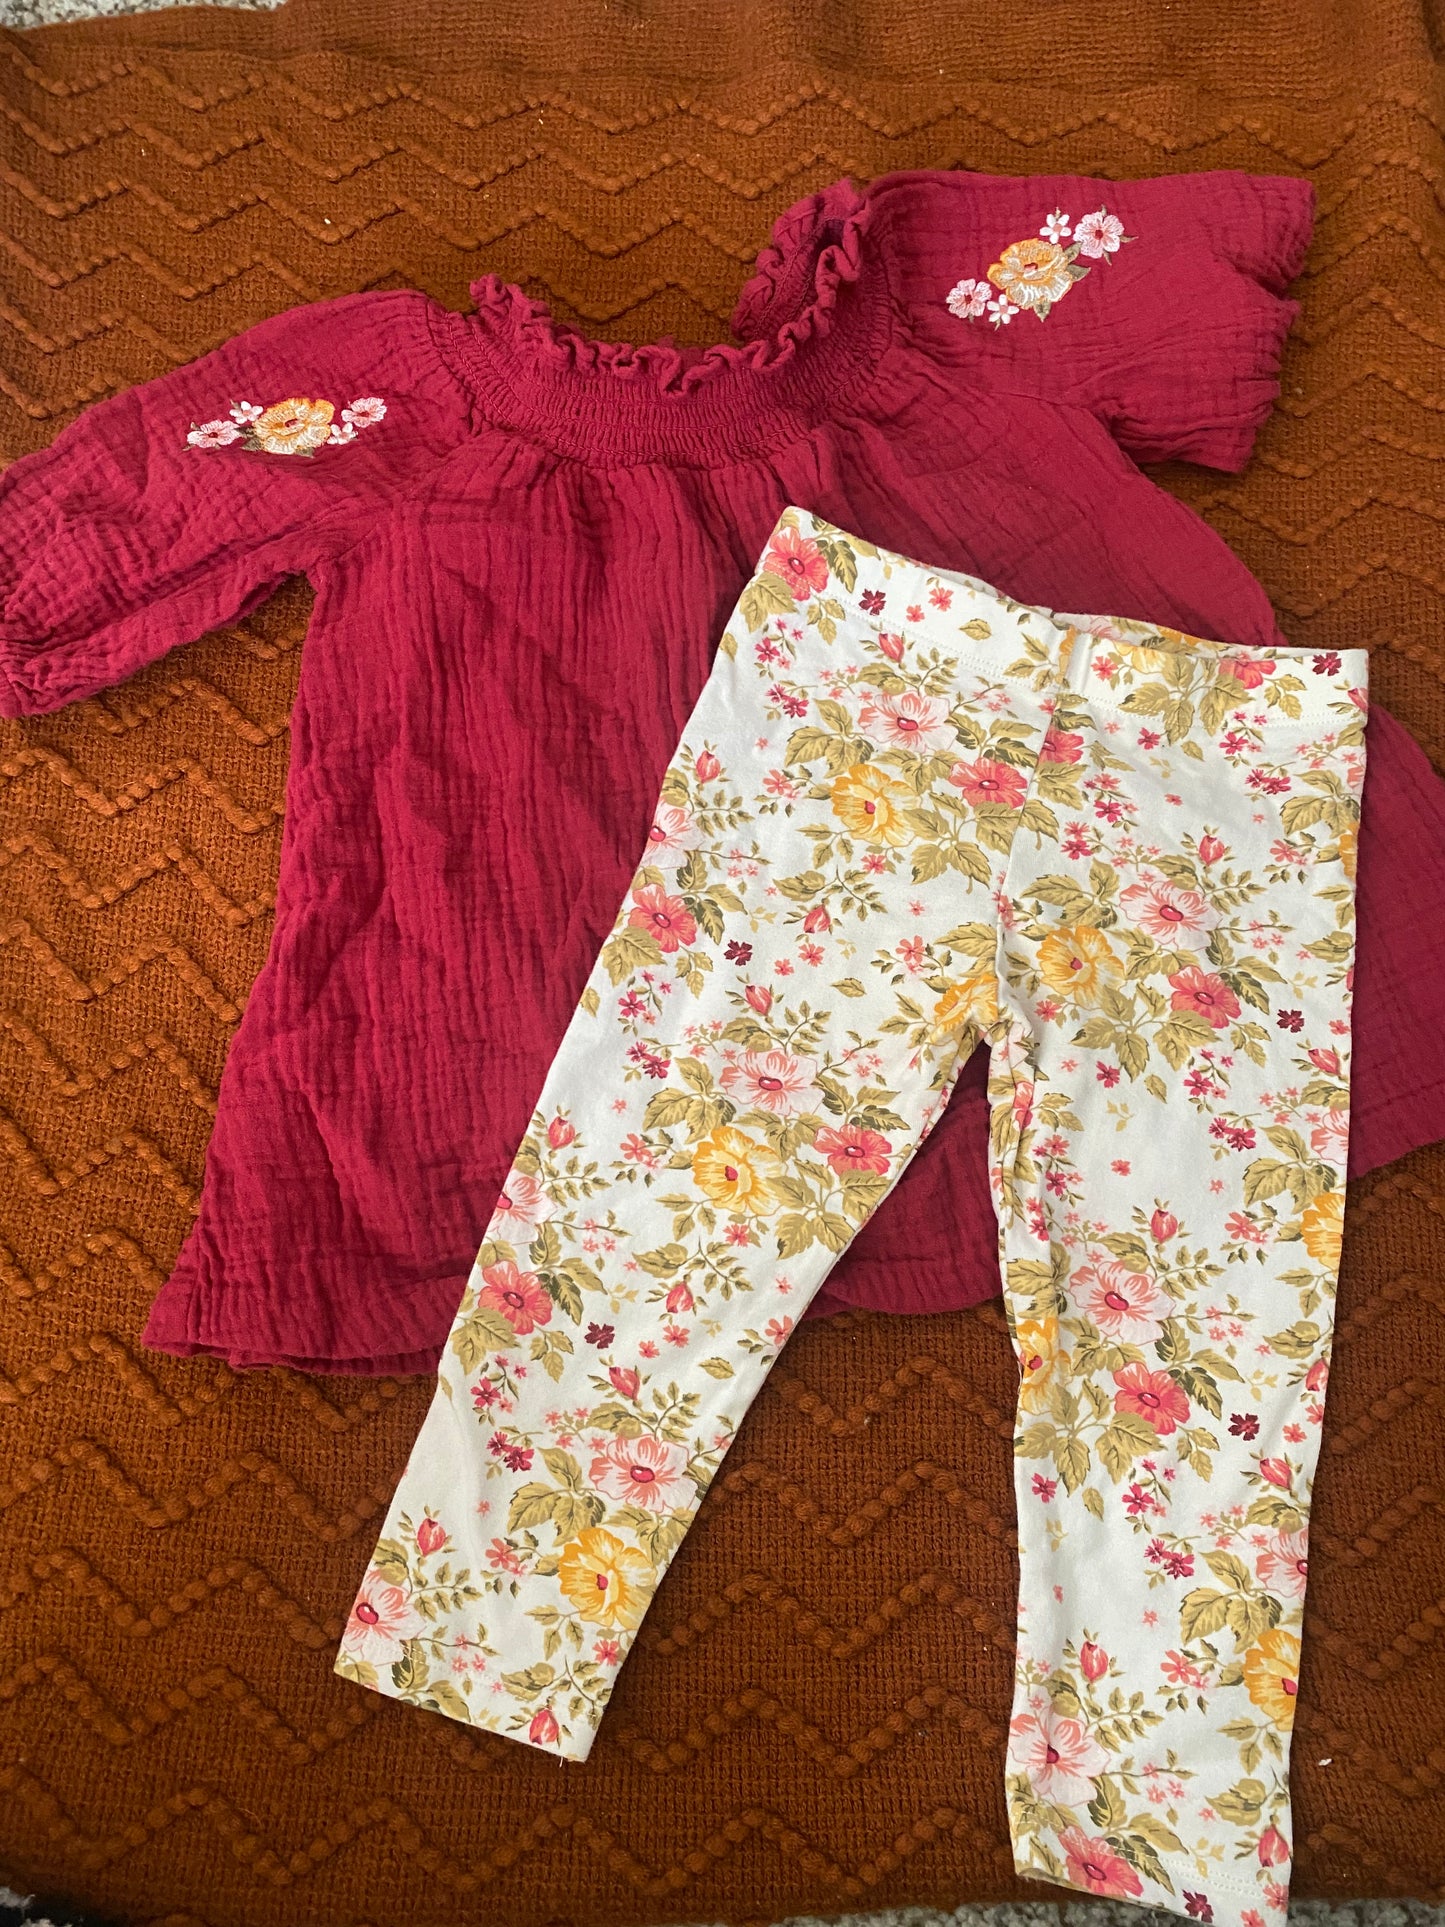 Girls 2T Outfit